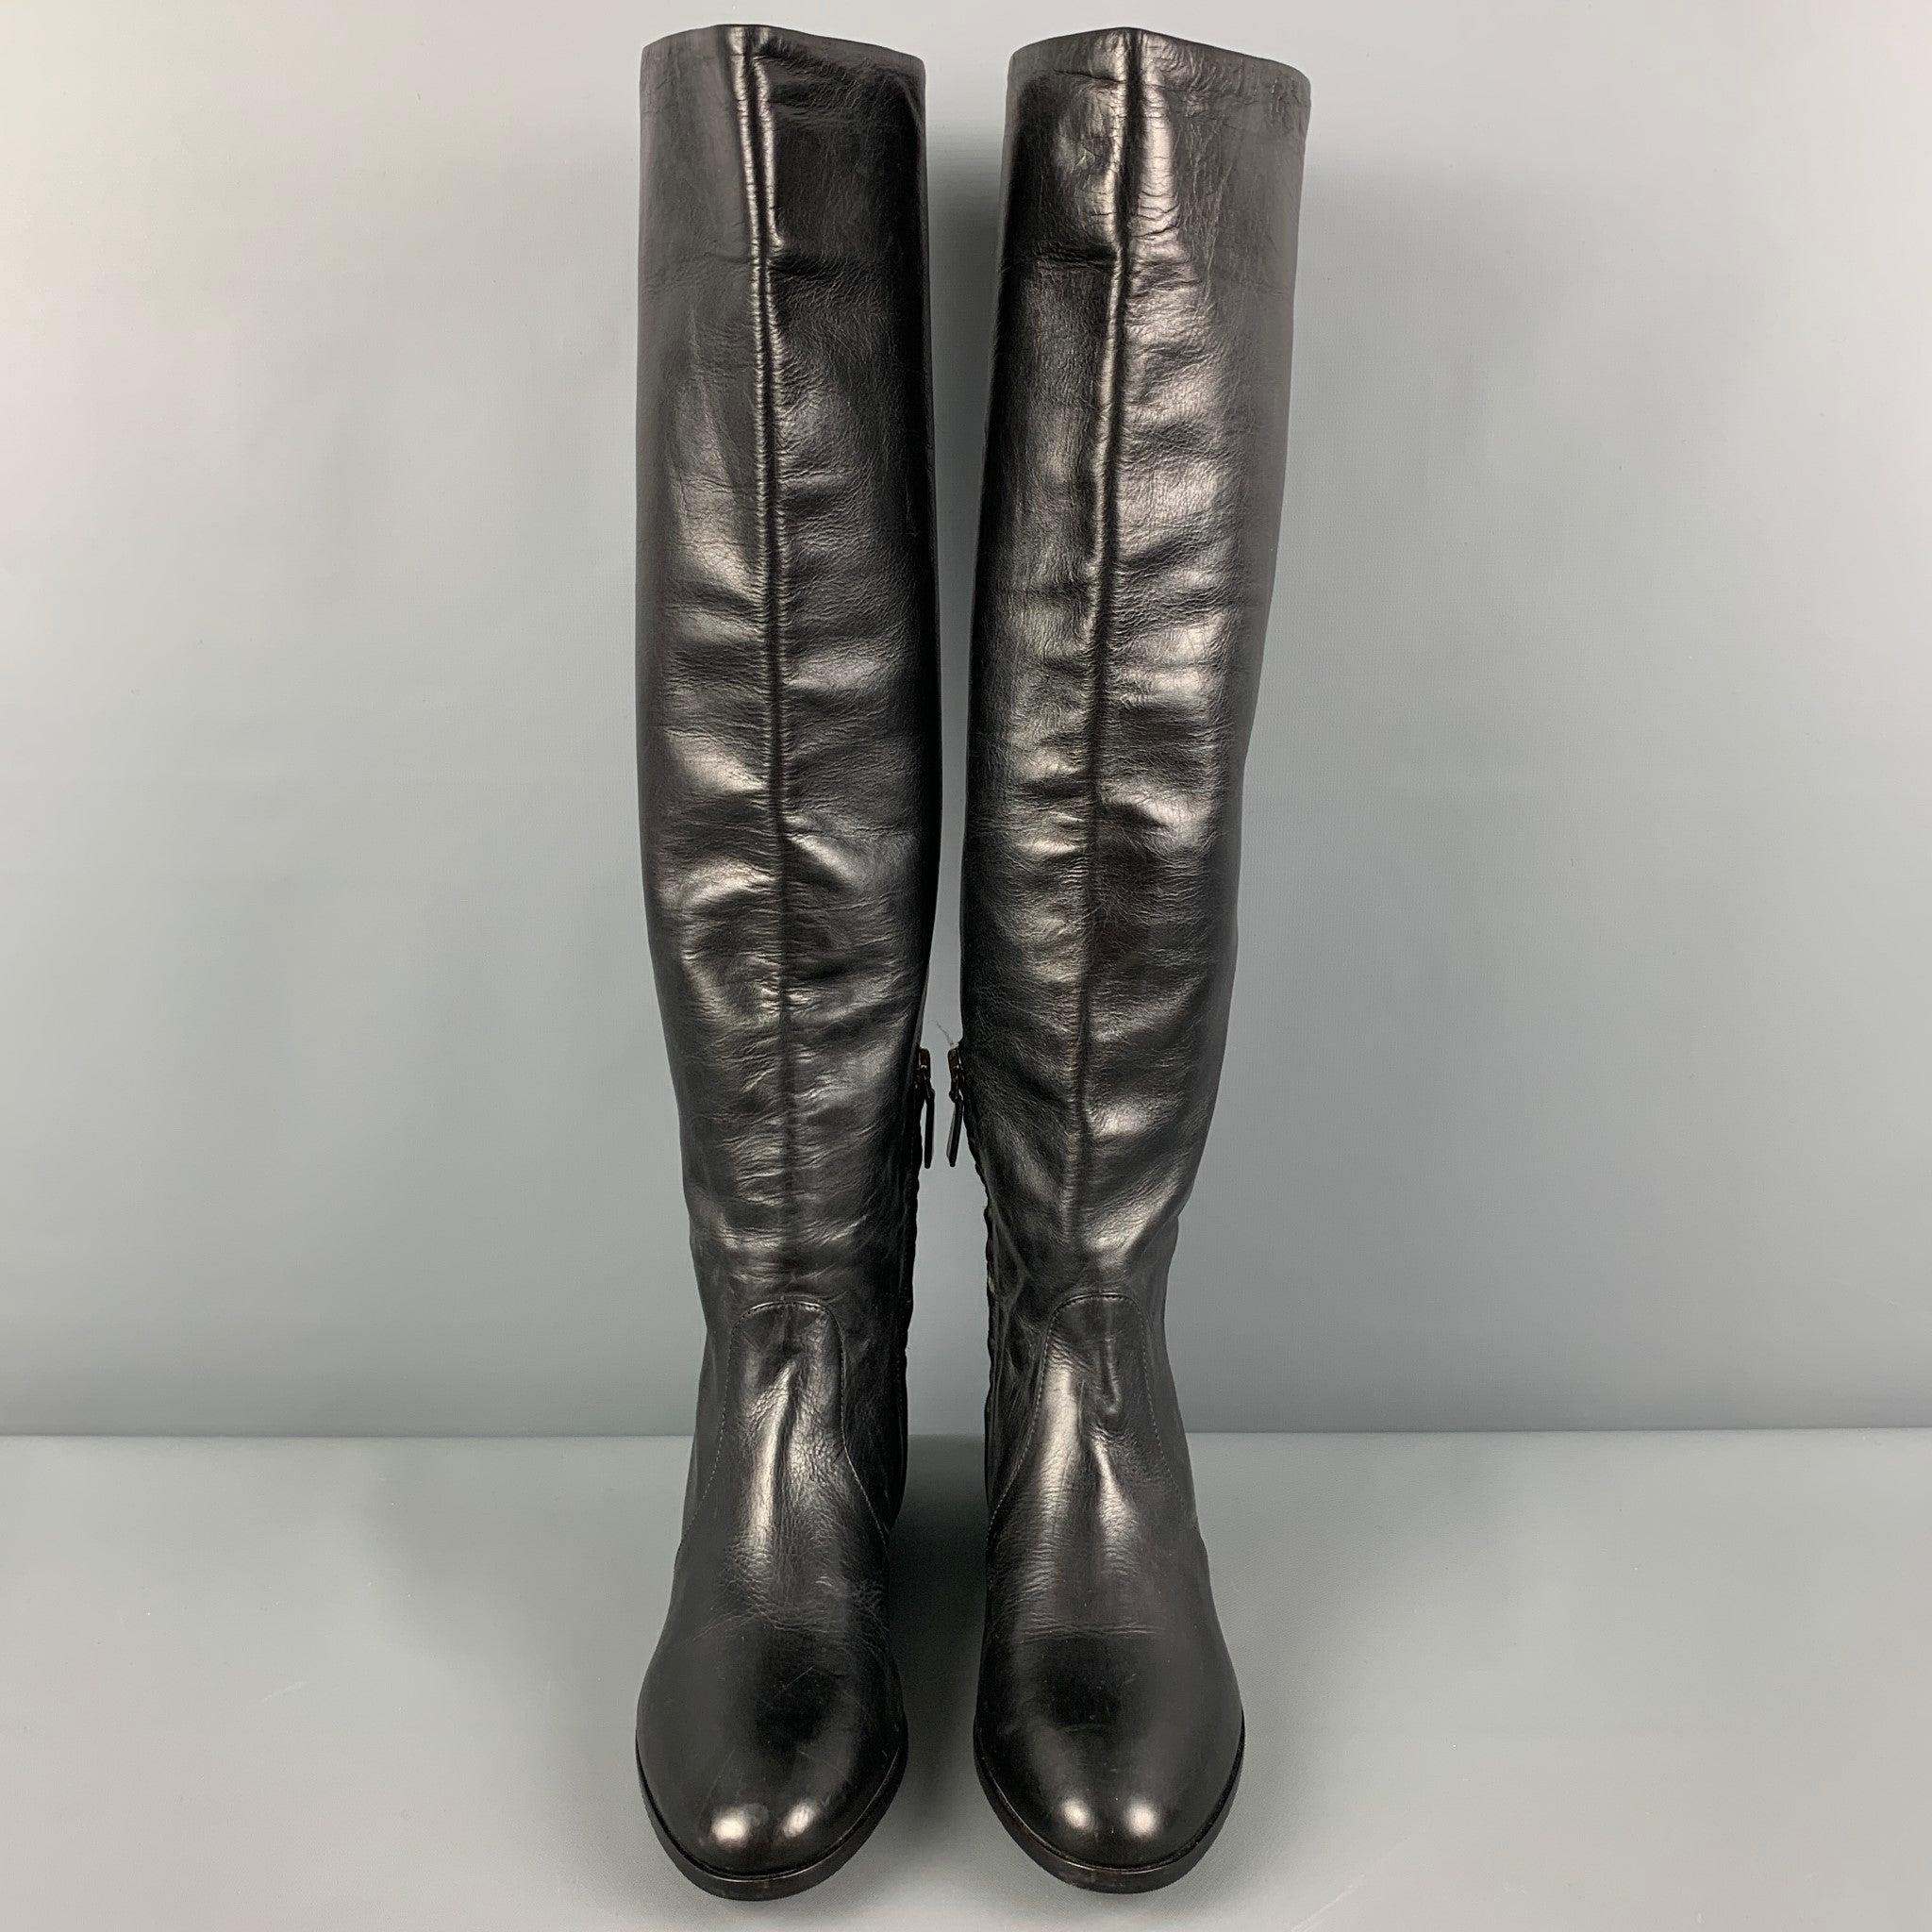 PRADA Size 7.5 Black Flat Boots In Excellent Condition For Sale In San Francisco, CA